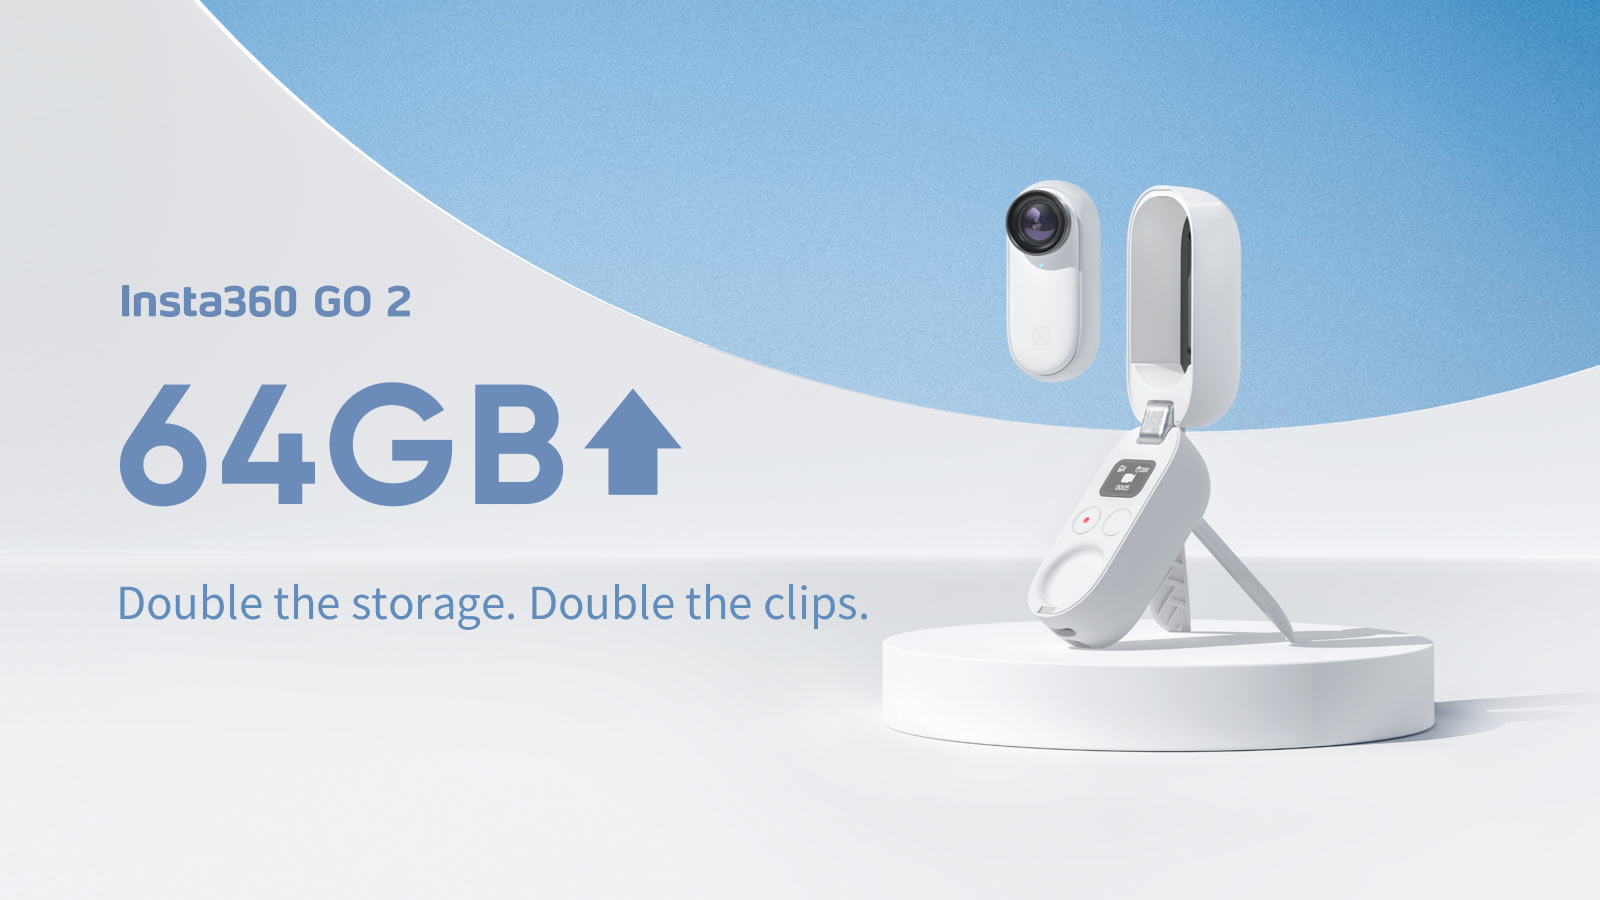 Insta360 GO 2 now packing 64GB storage in minuscule action camera